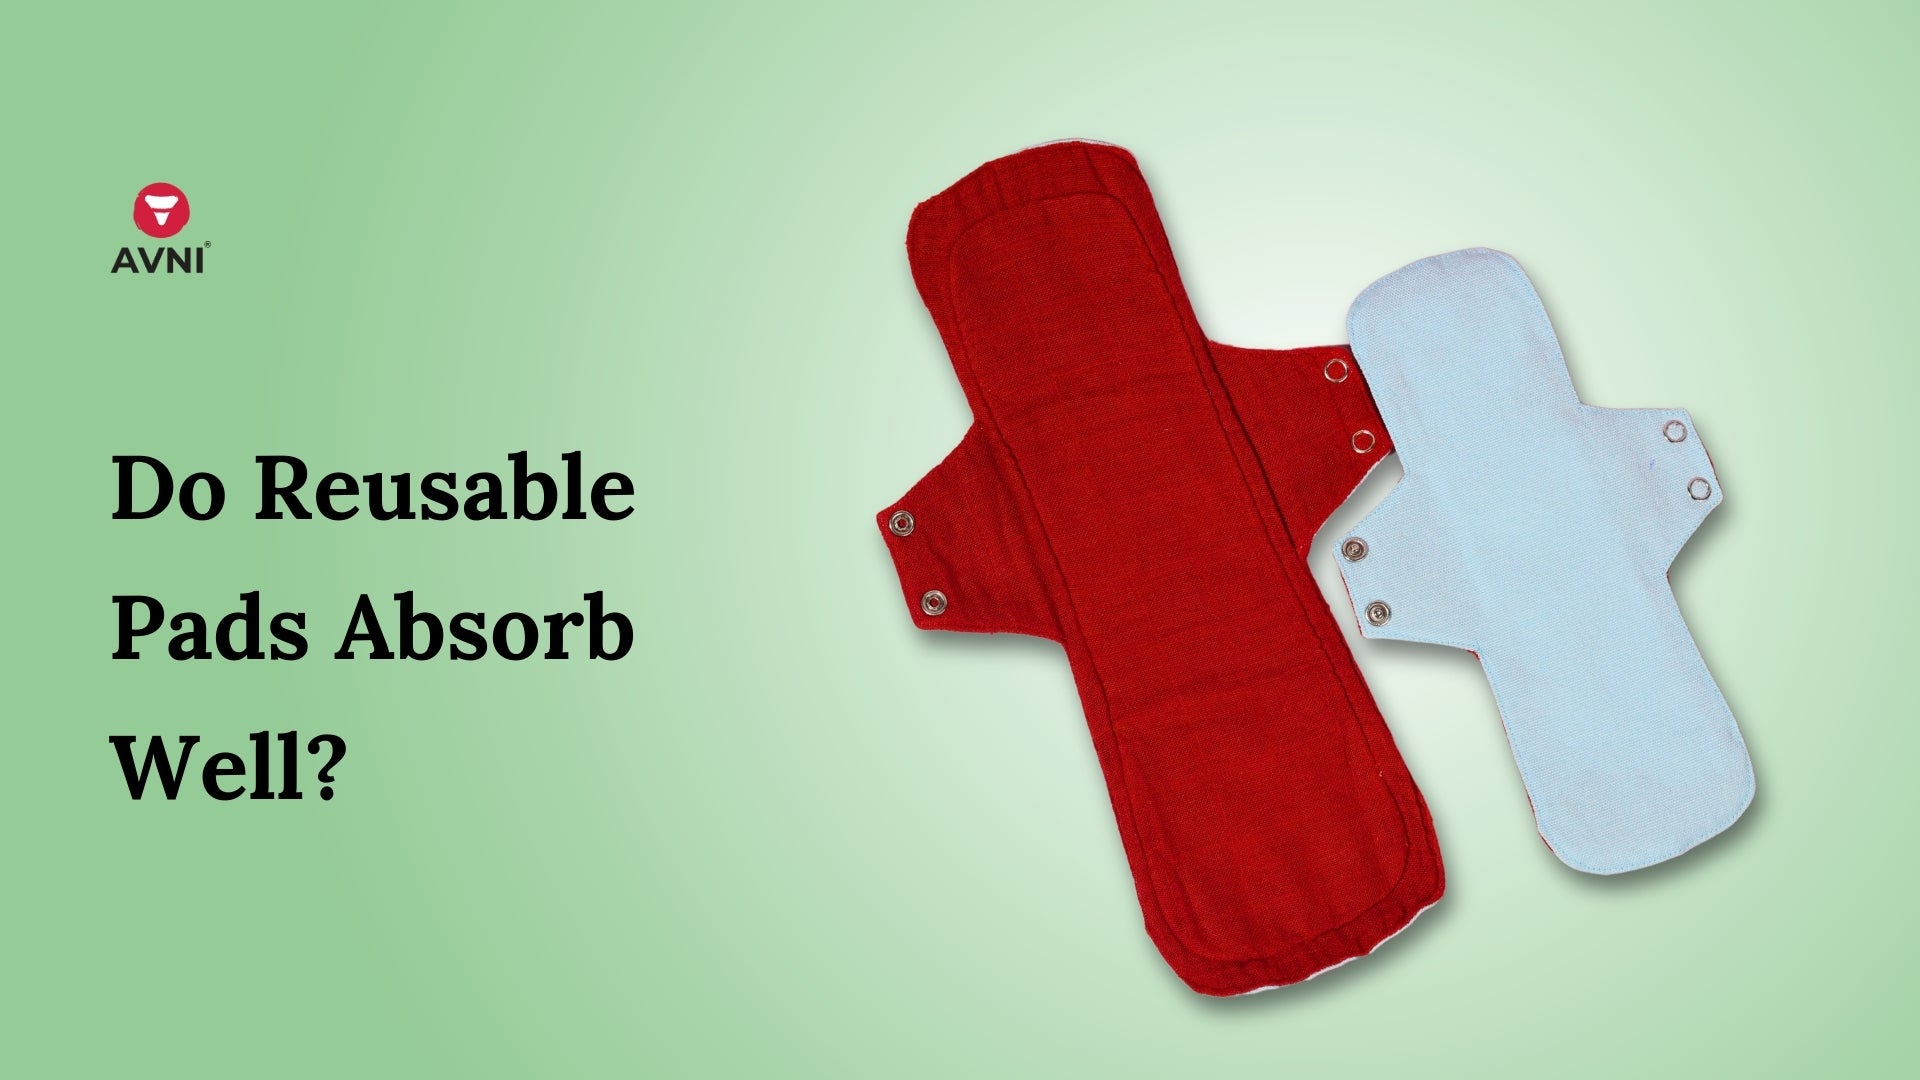 Pads in Red Bandage. the Concept of Feminine Personal Hygiene